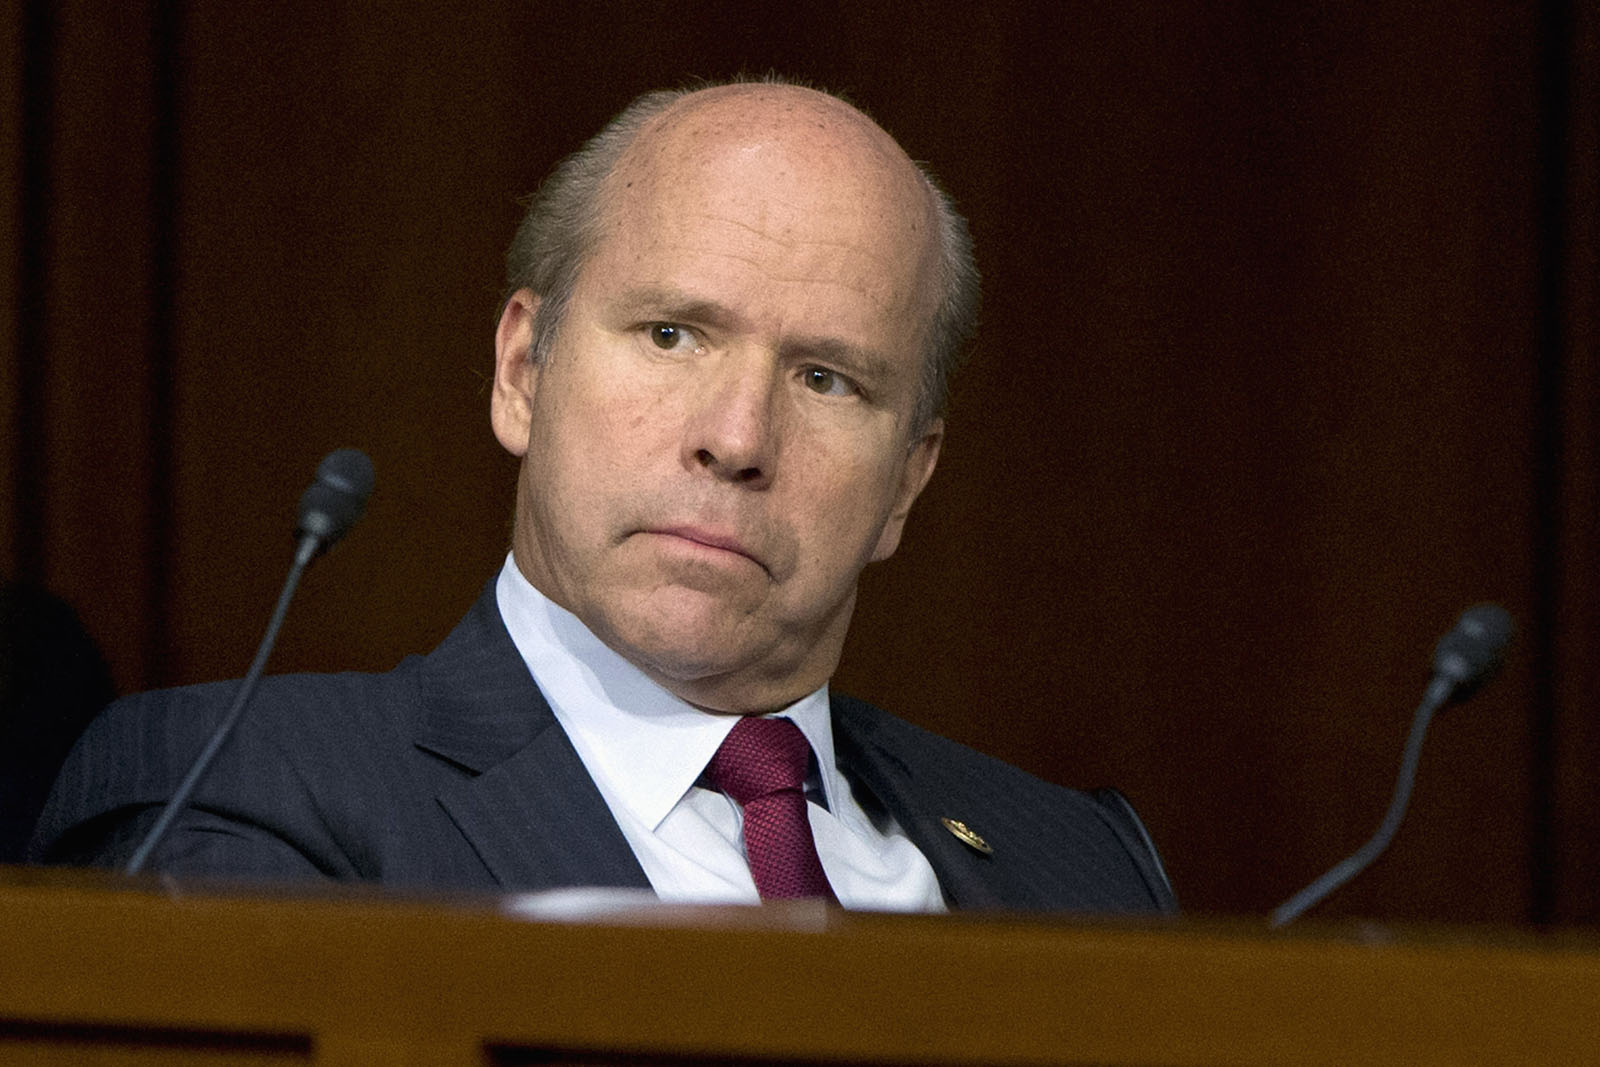 Rep. John Delaney, D-Md., ranks number 13 on Fortune's list of the world's greatest leaders. (AP Photo/Jacquelyn Martin)